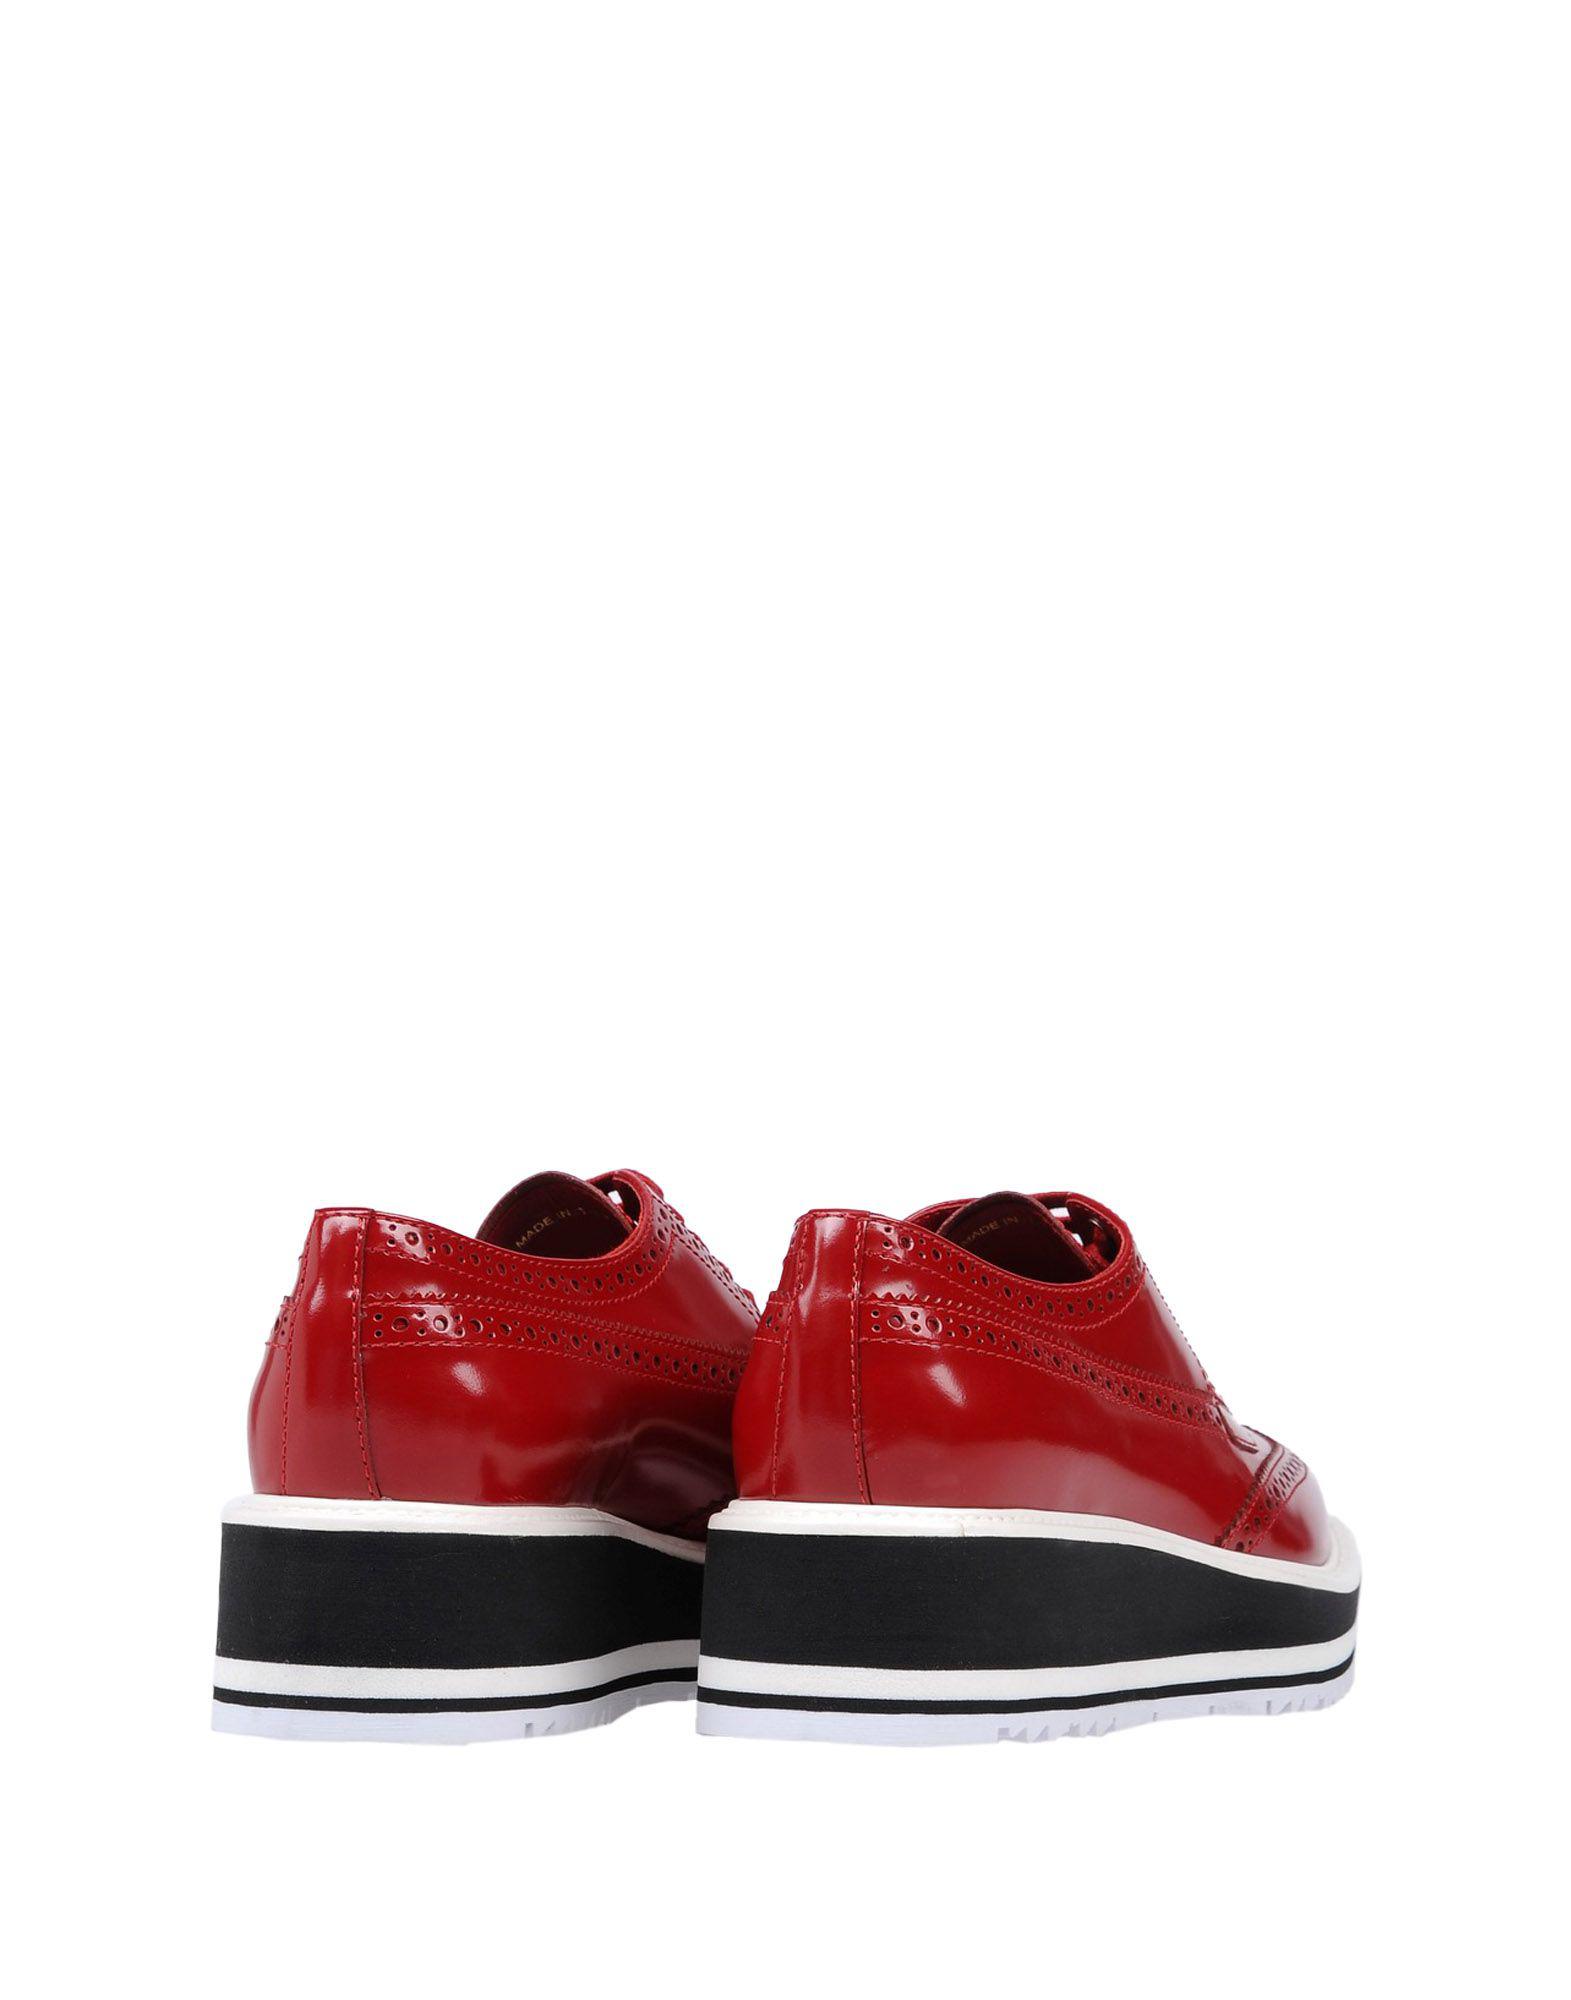 Prada Leather Lace-up Shoe in Red - Lyst